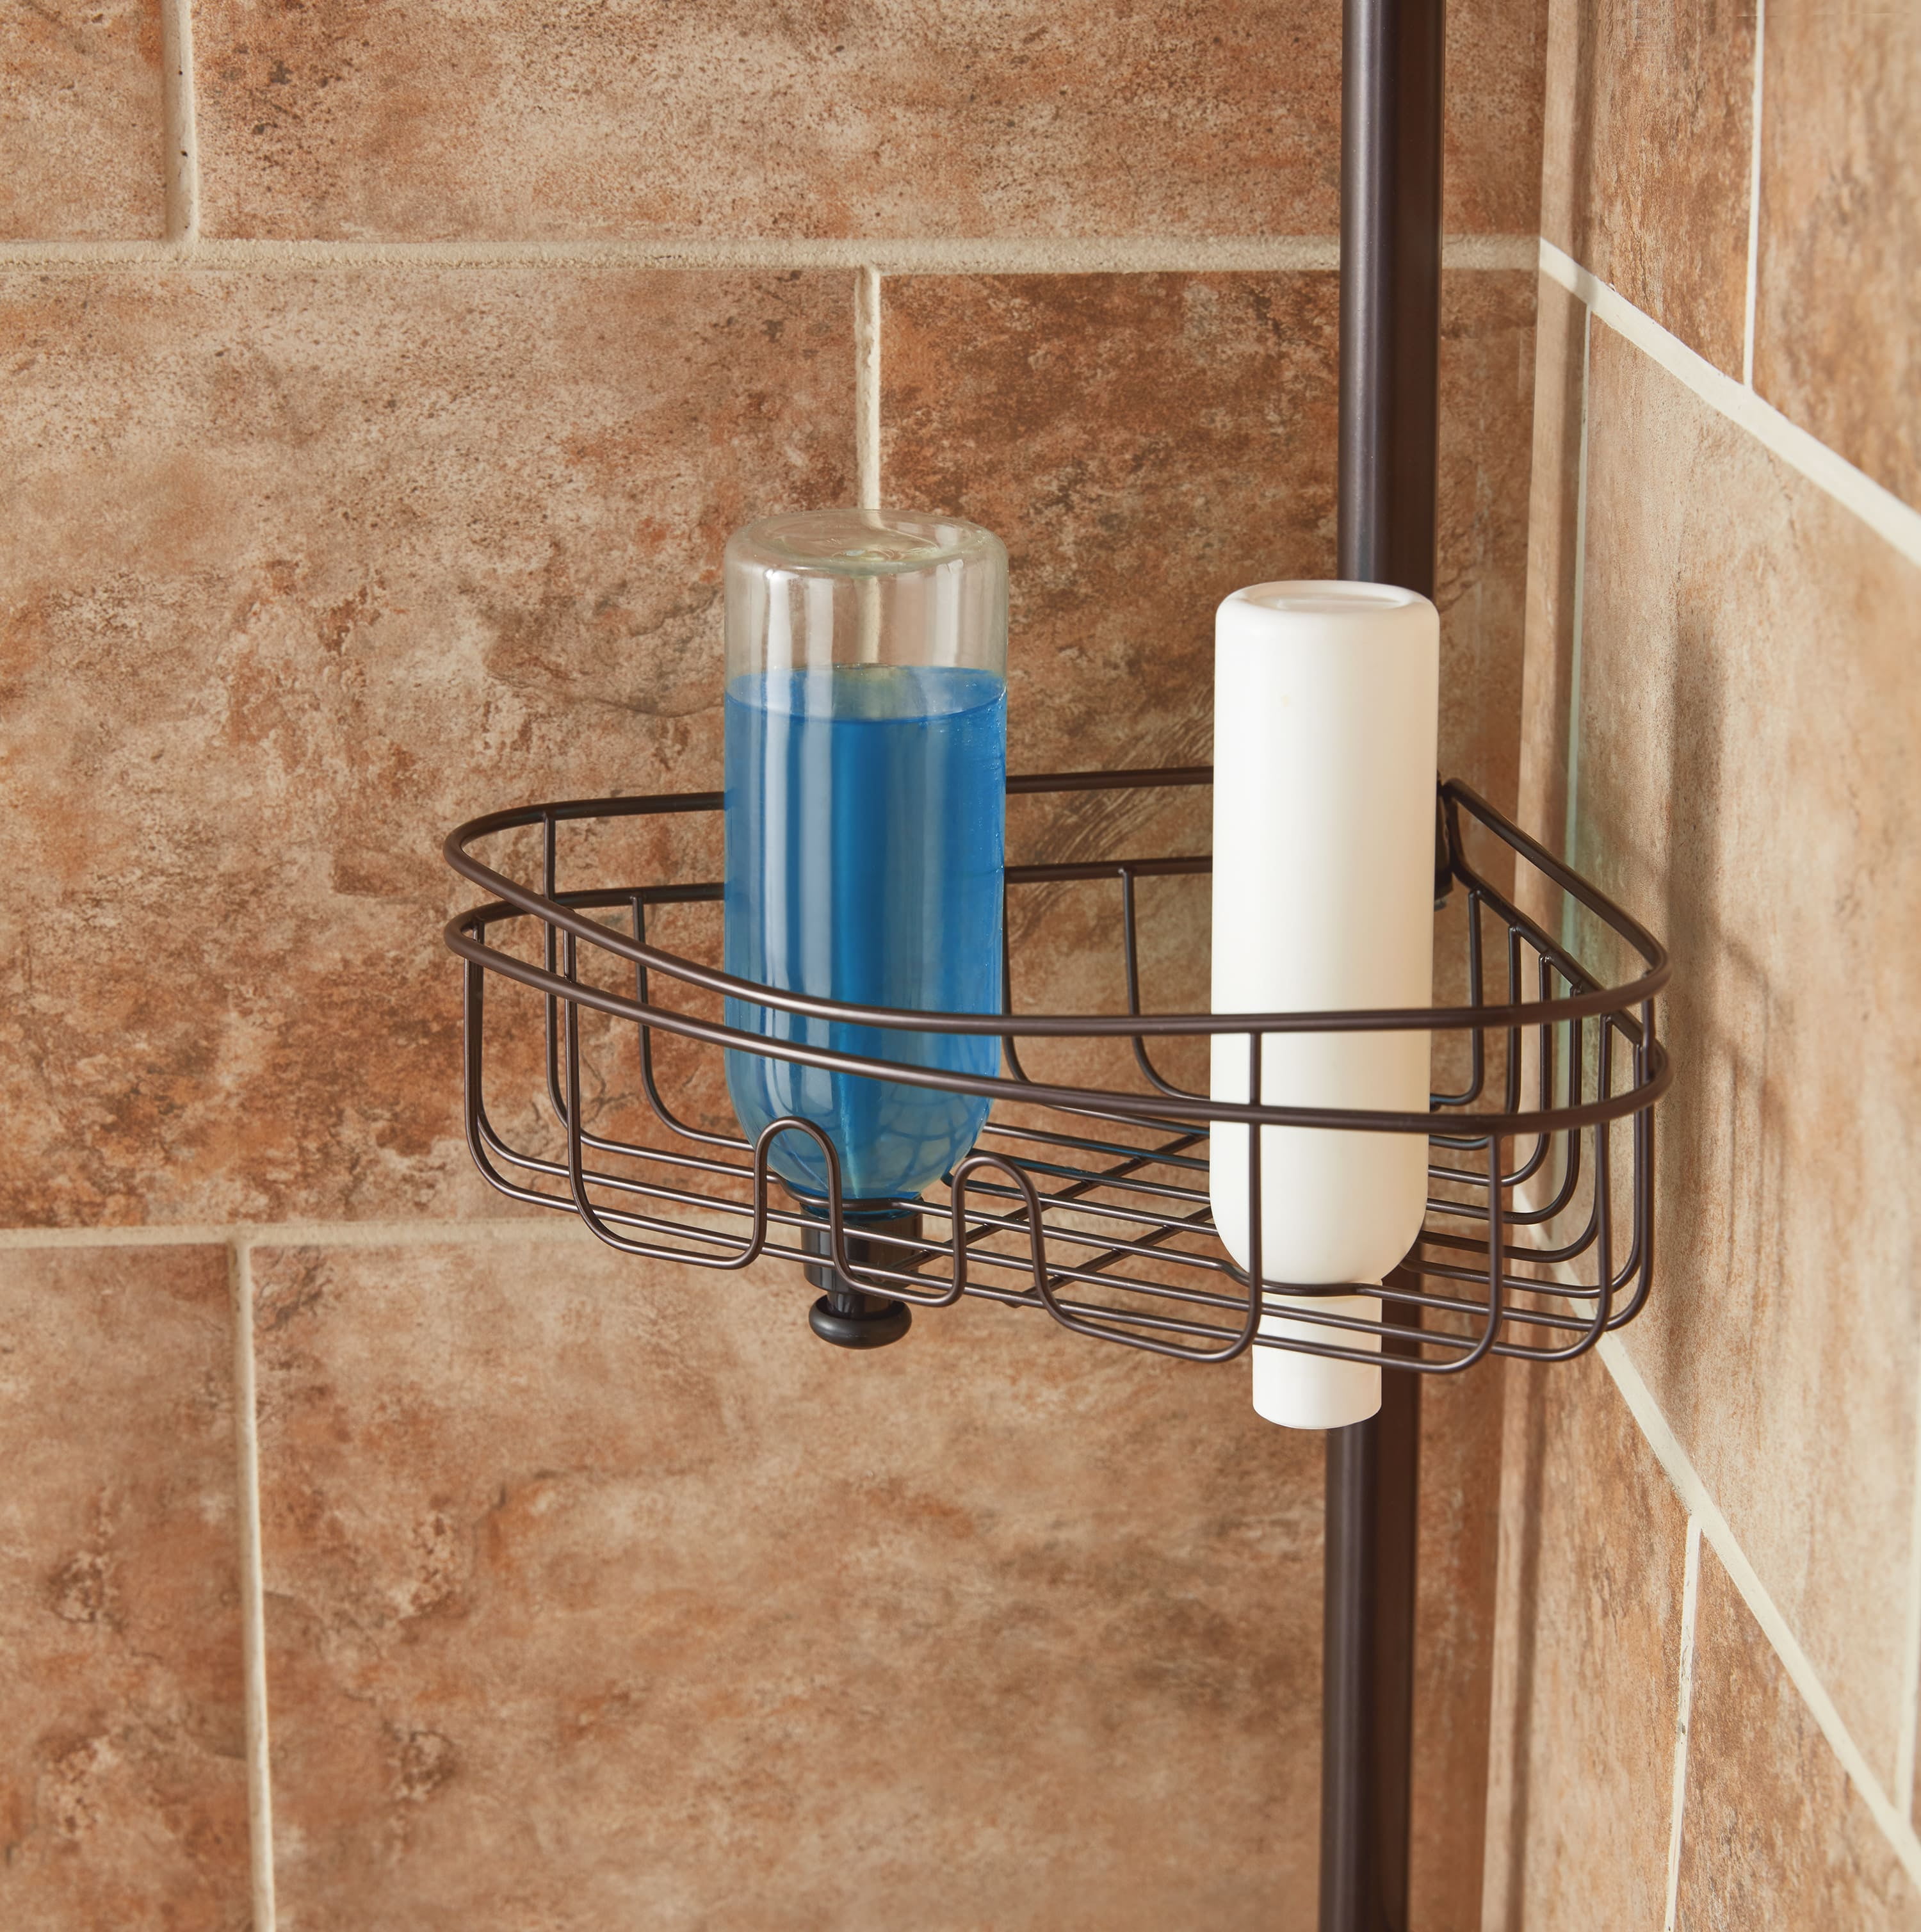 Mainstays 3-Shelf Home Tension Pole Shower Caddy, Oil-Rubbed Bronze -  AliExpress